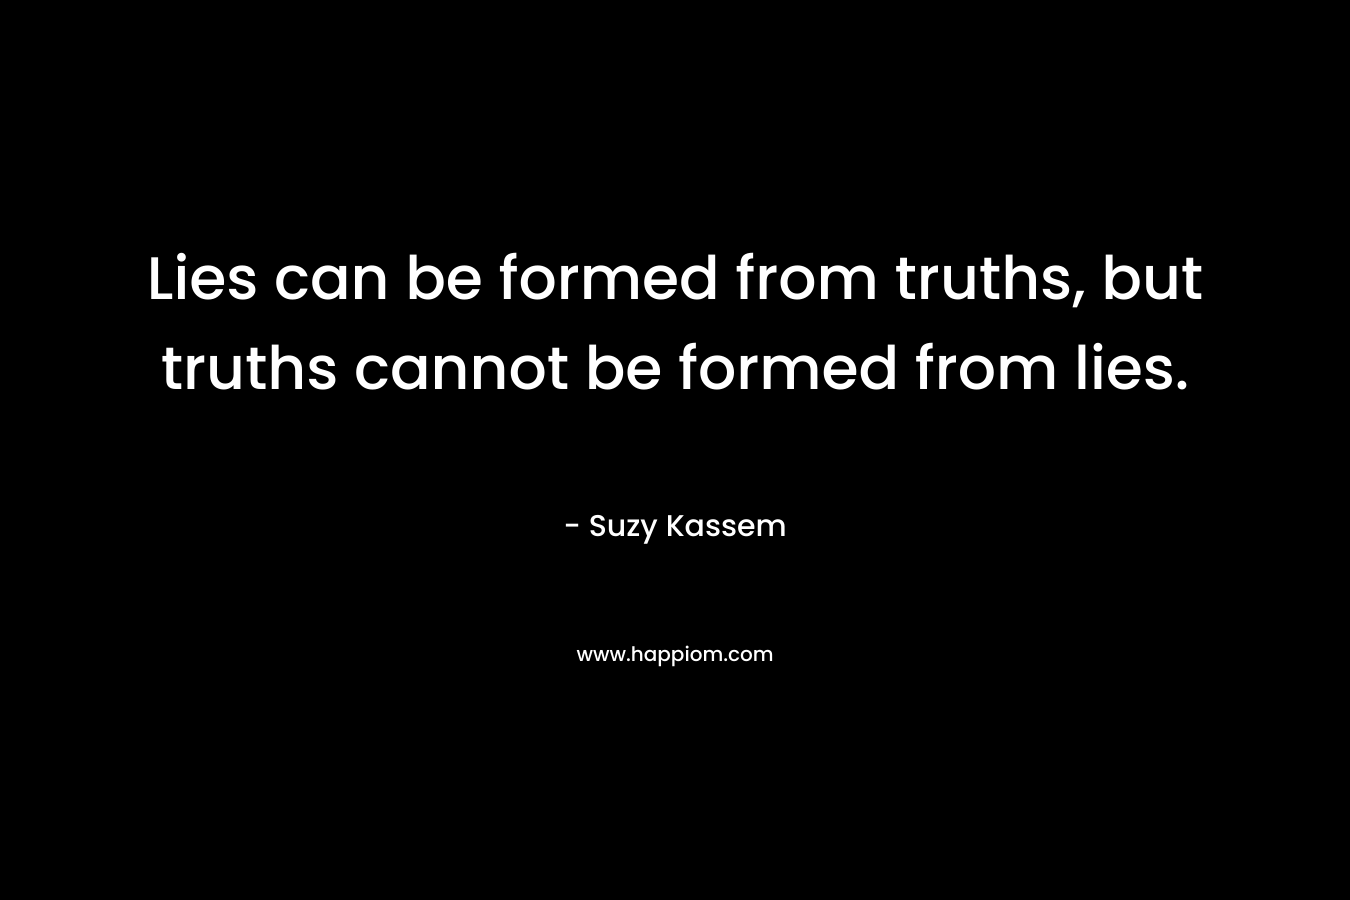 Lies can be formed from truths, but truths cannot be formed from lies.